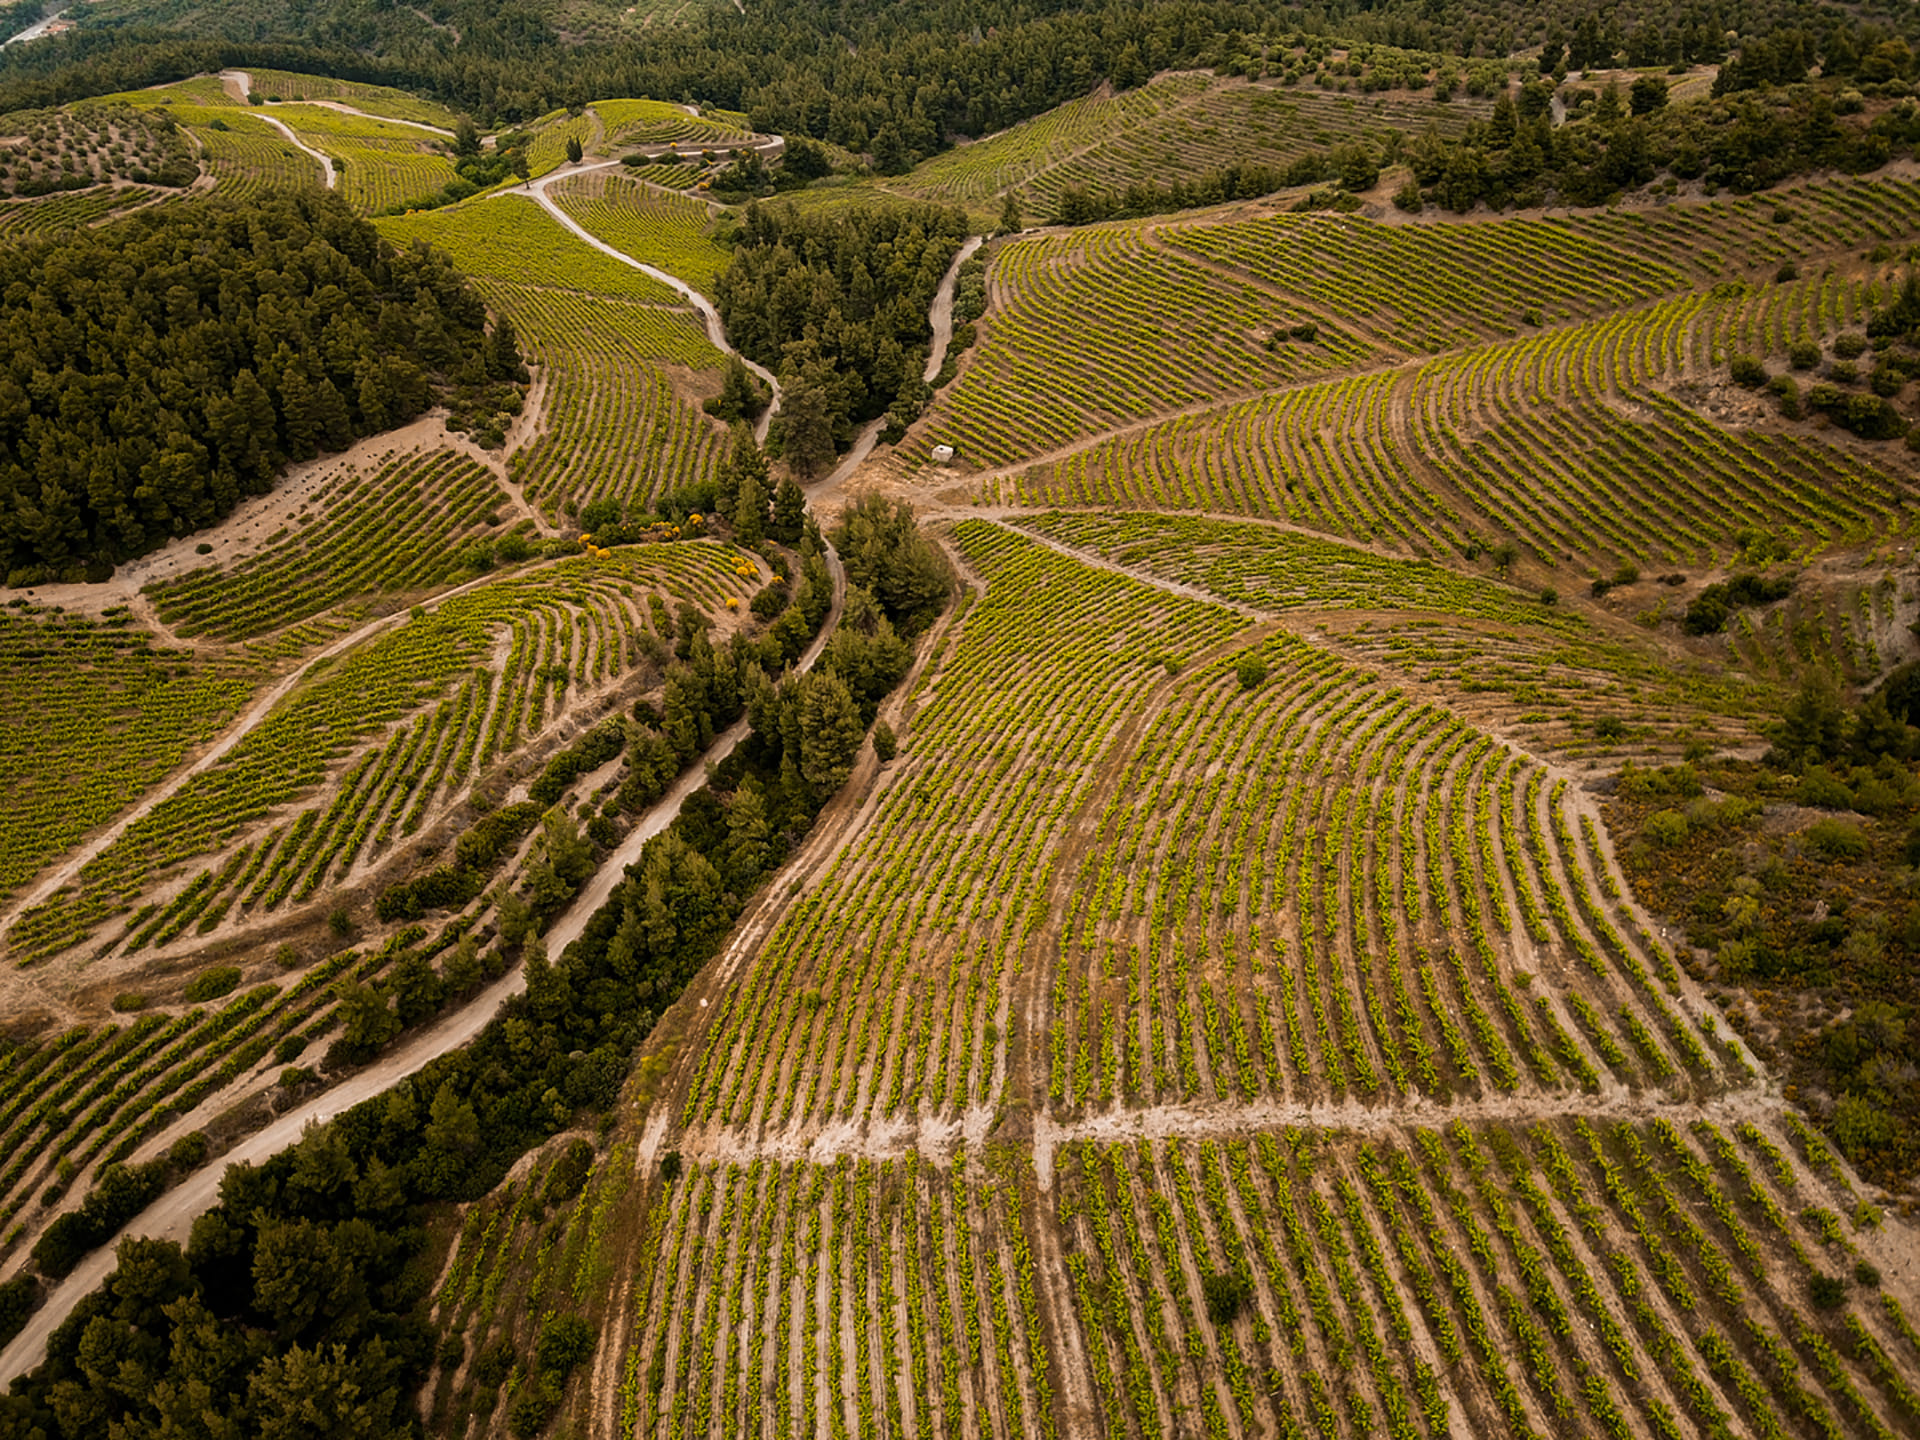 Vineyards are one of the joys of the Halkidiki countryside